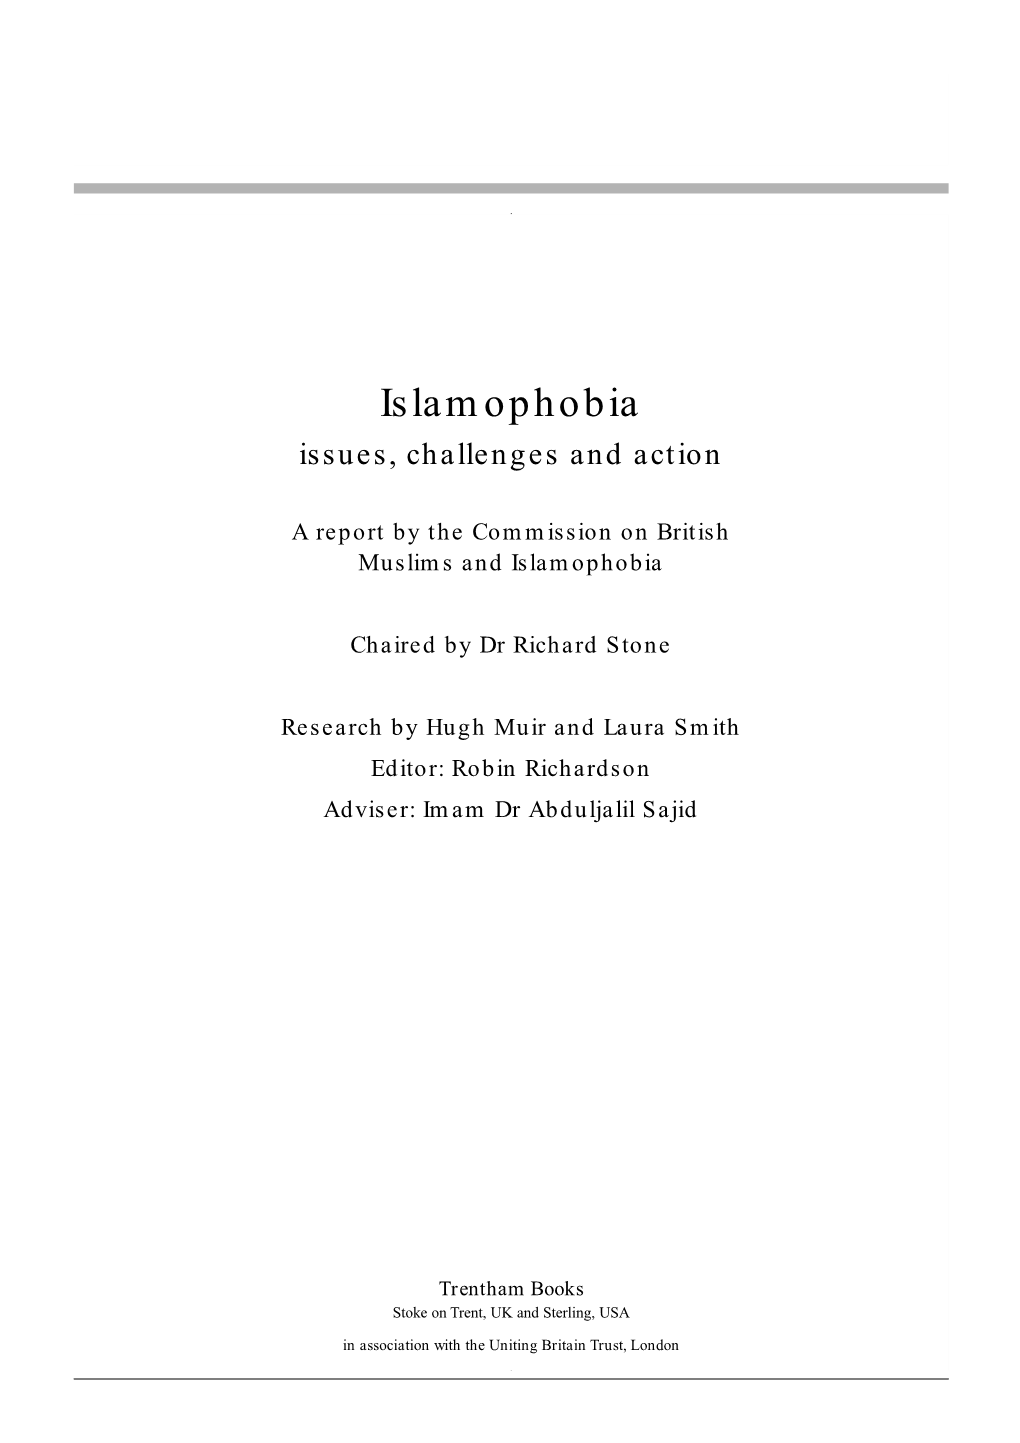 Islamophobia Issues, Challenges and Action